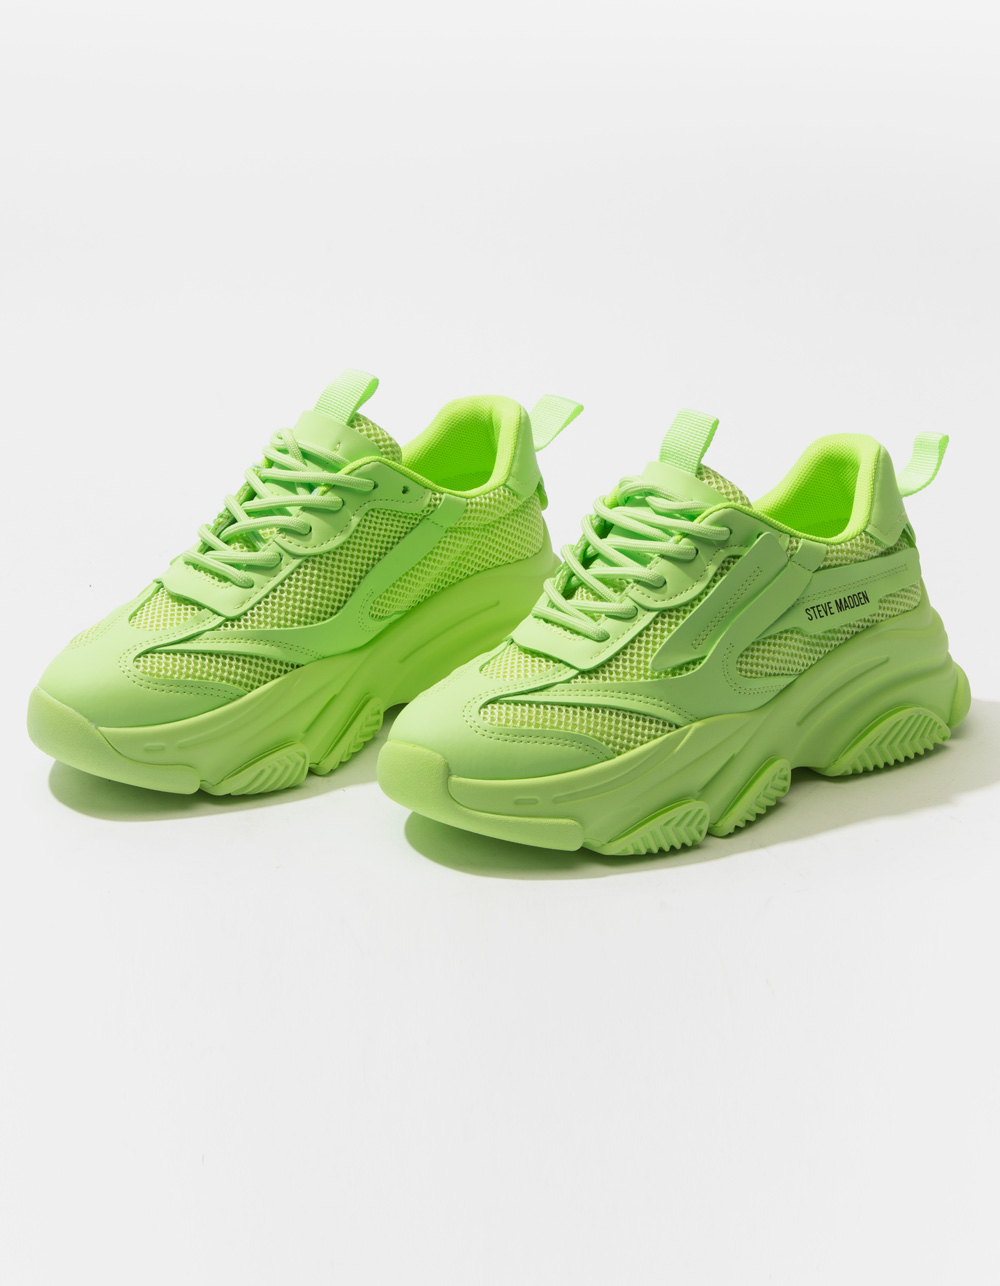 Steve Madden possession trainers in lime